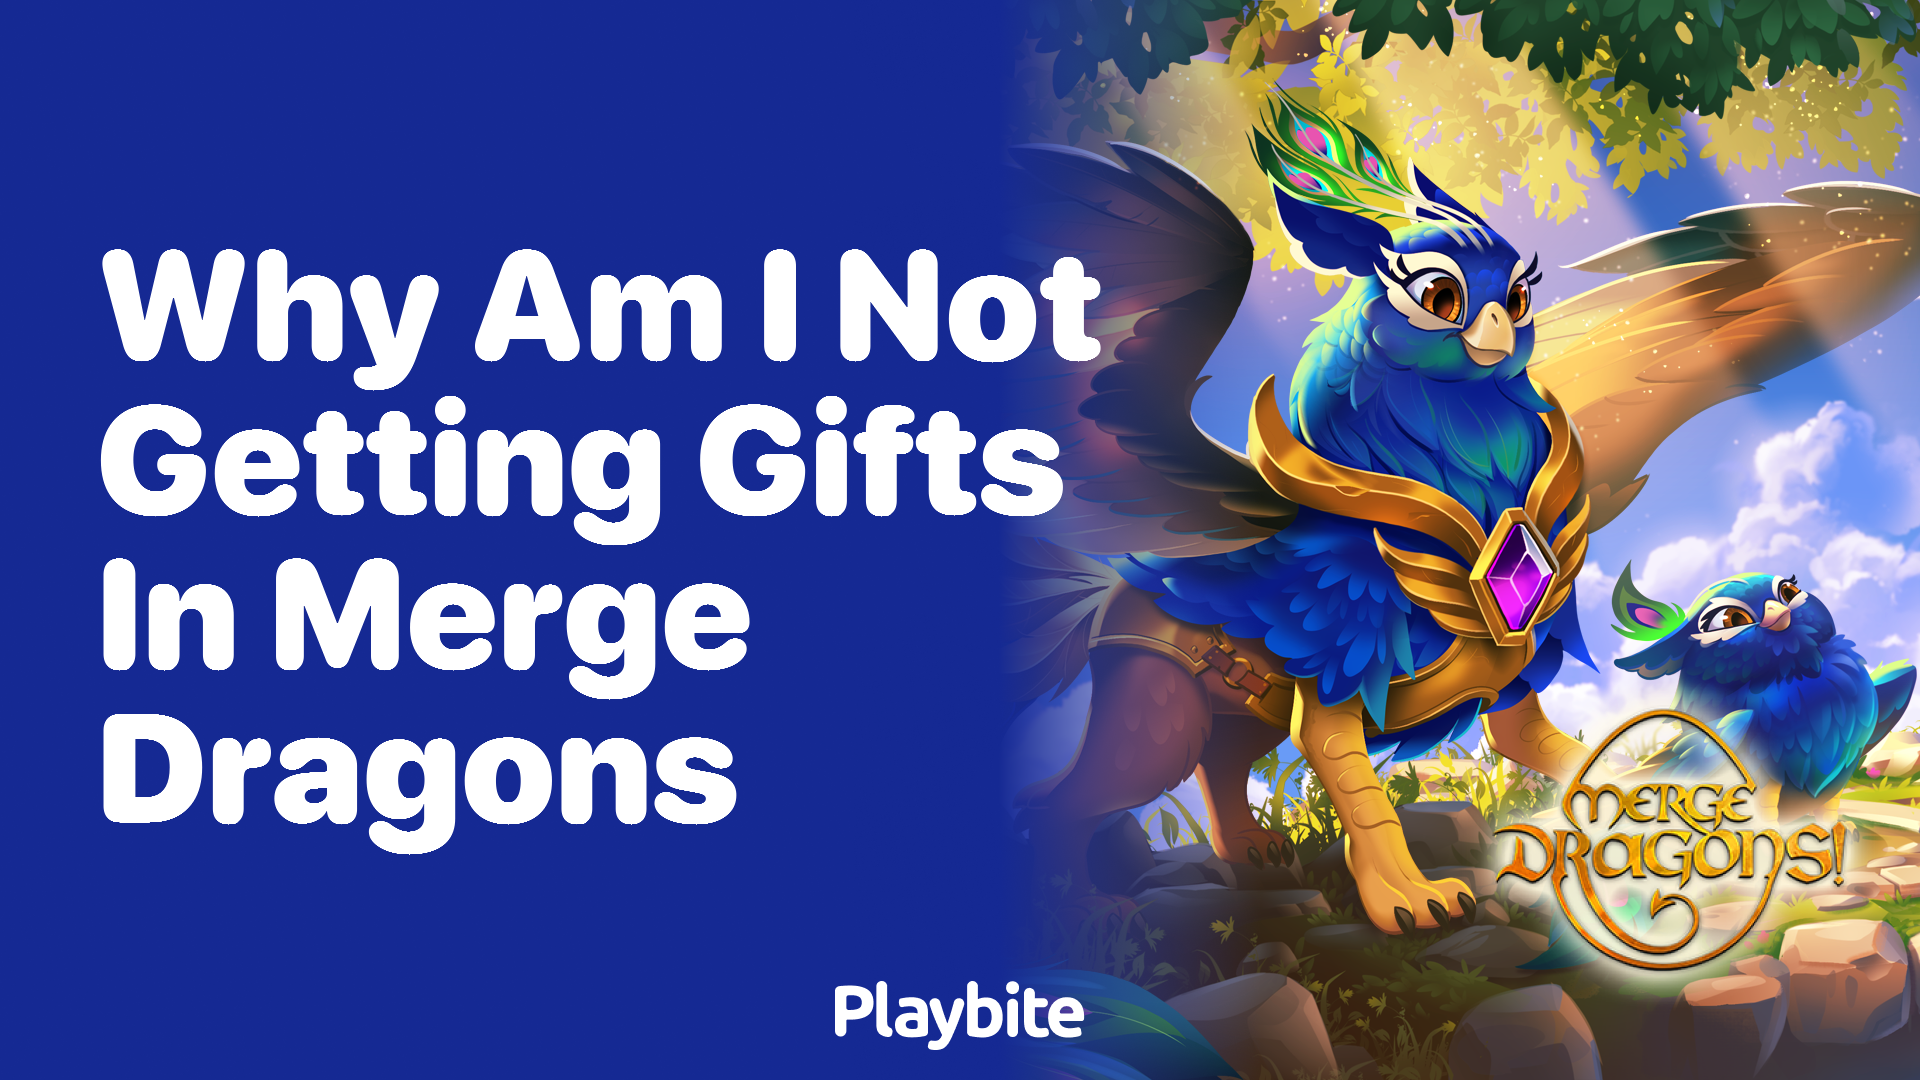 Why am I not getting gifts in Merge Dragons?